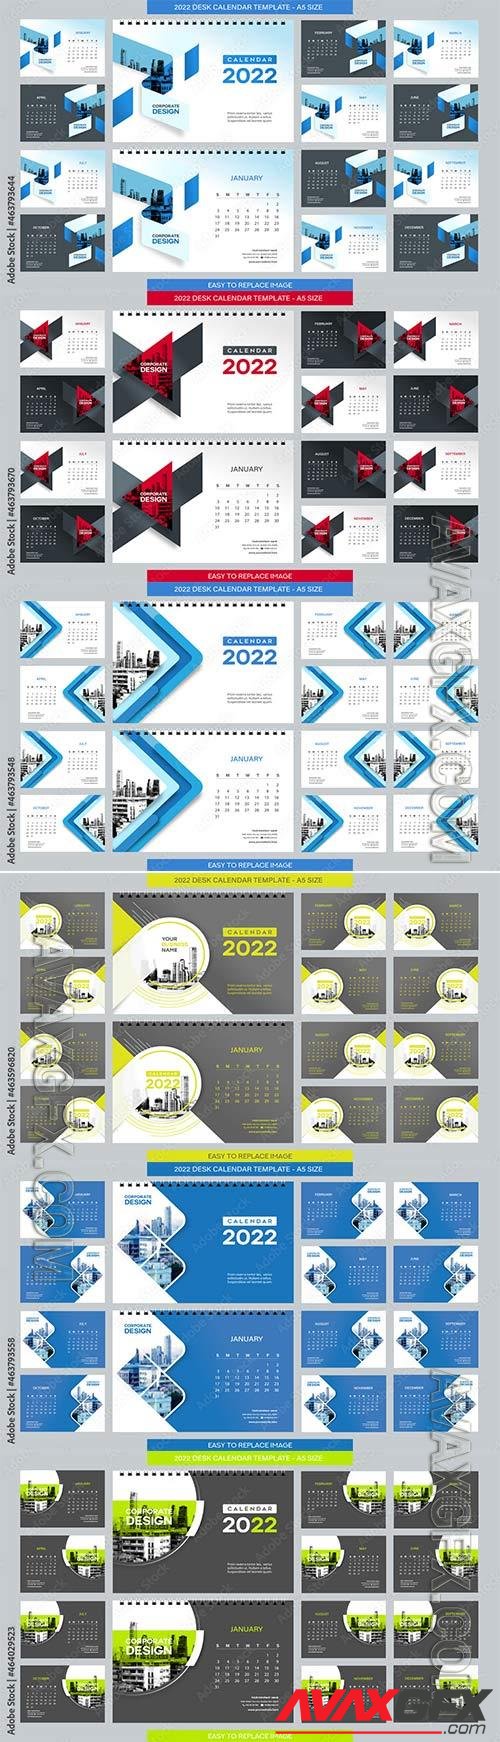 Desk Calendar 2022 template - 12 months included - A5 Size